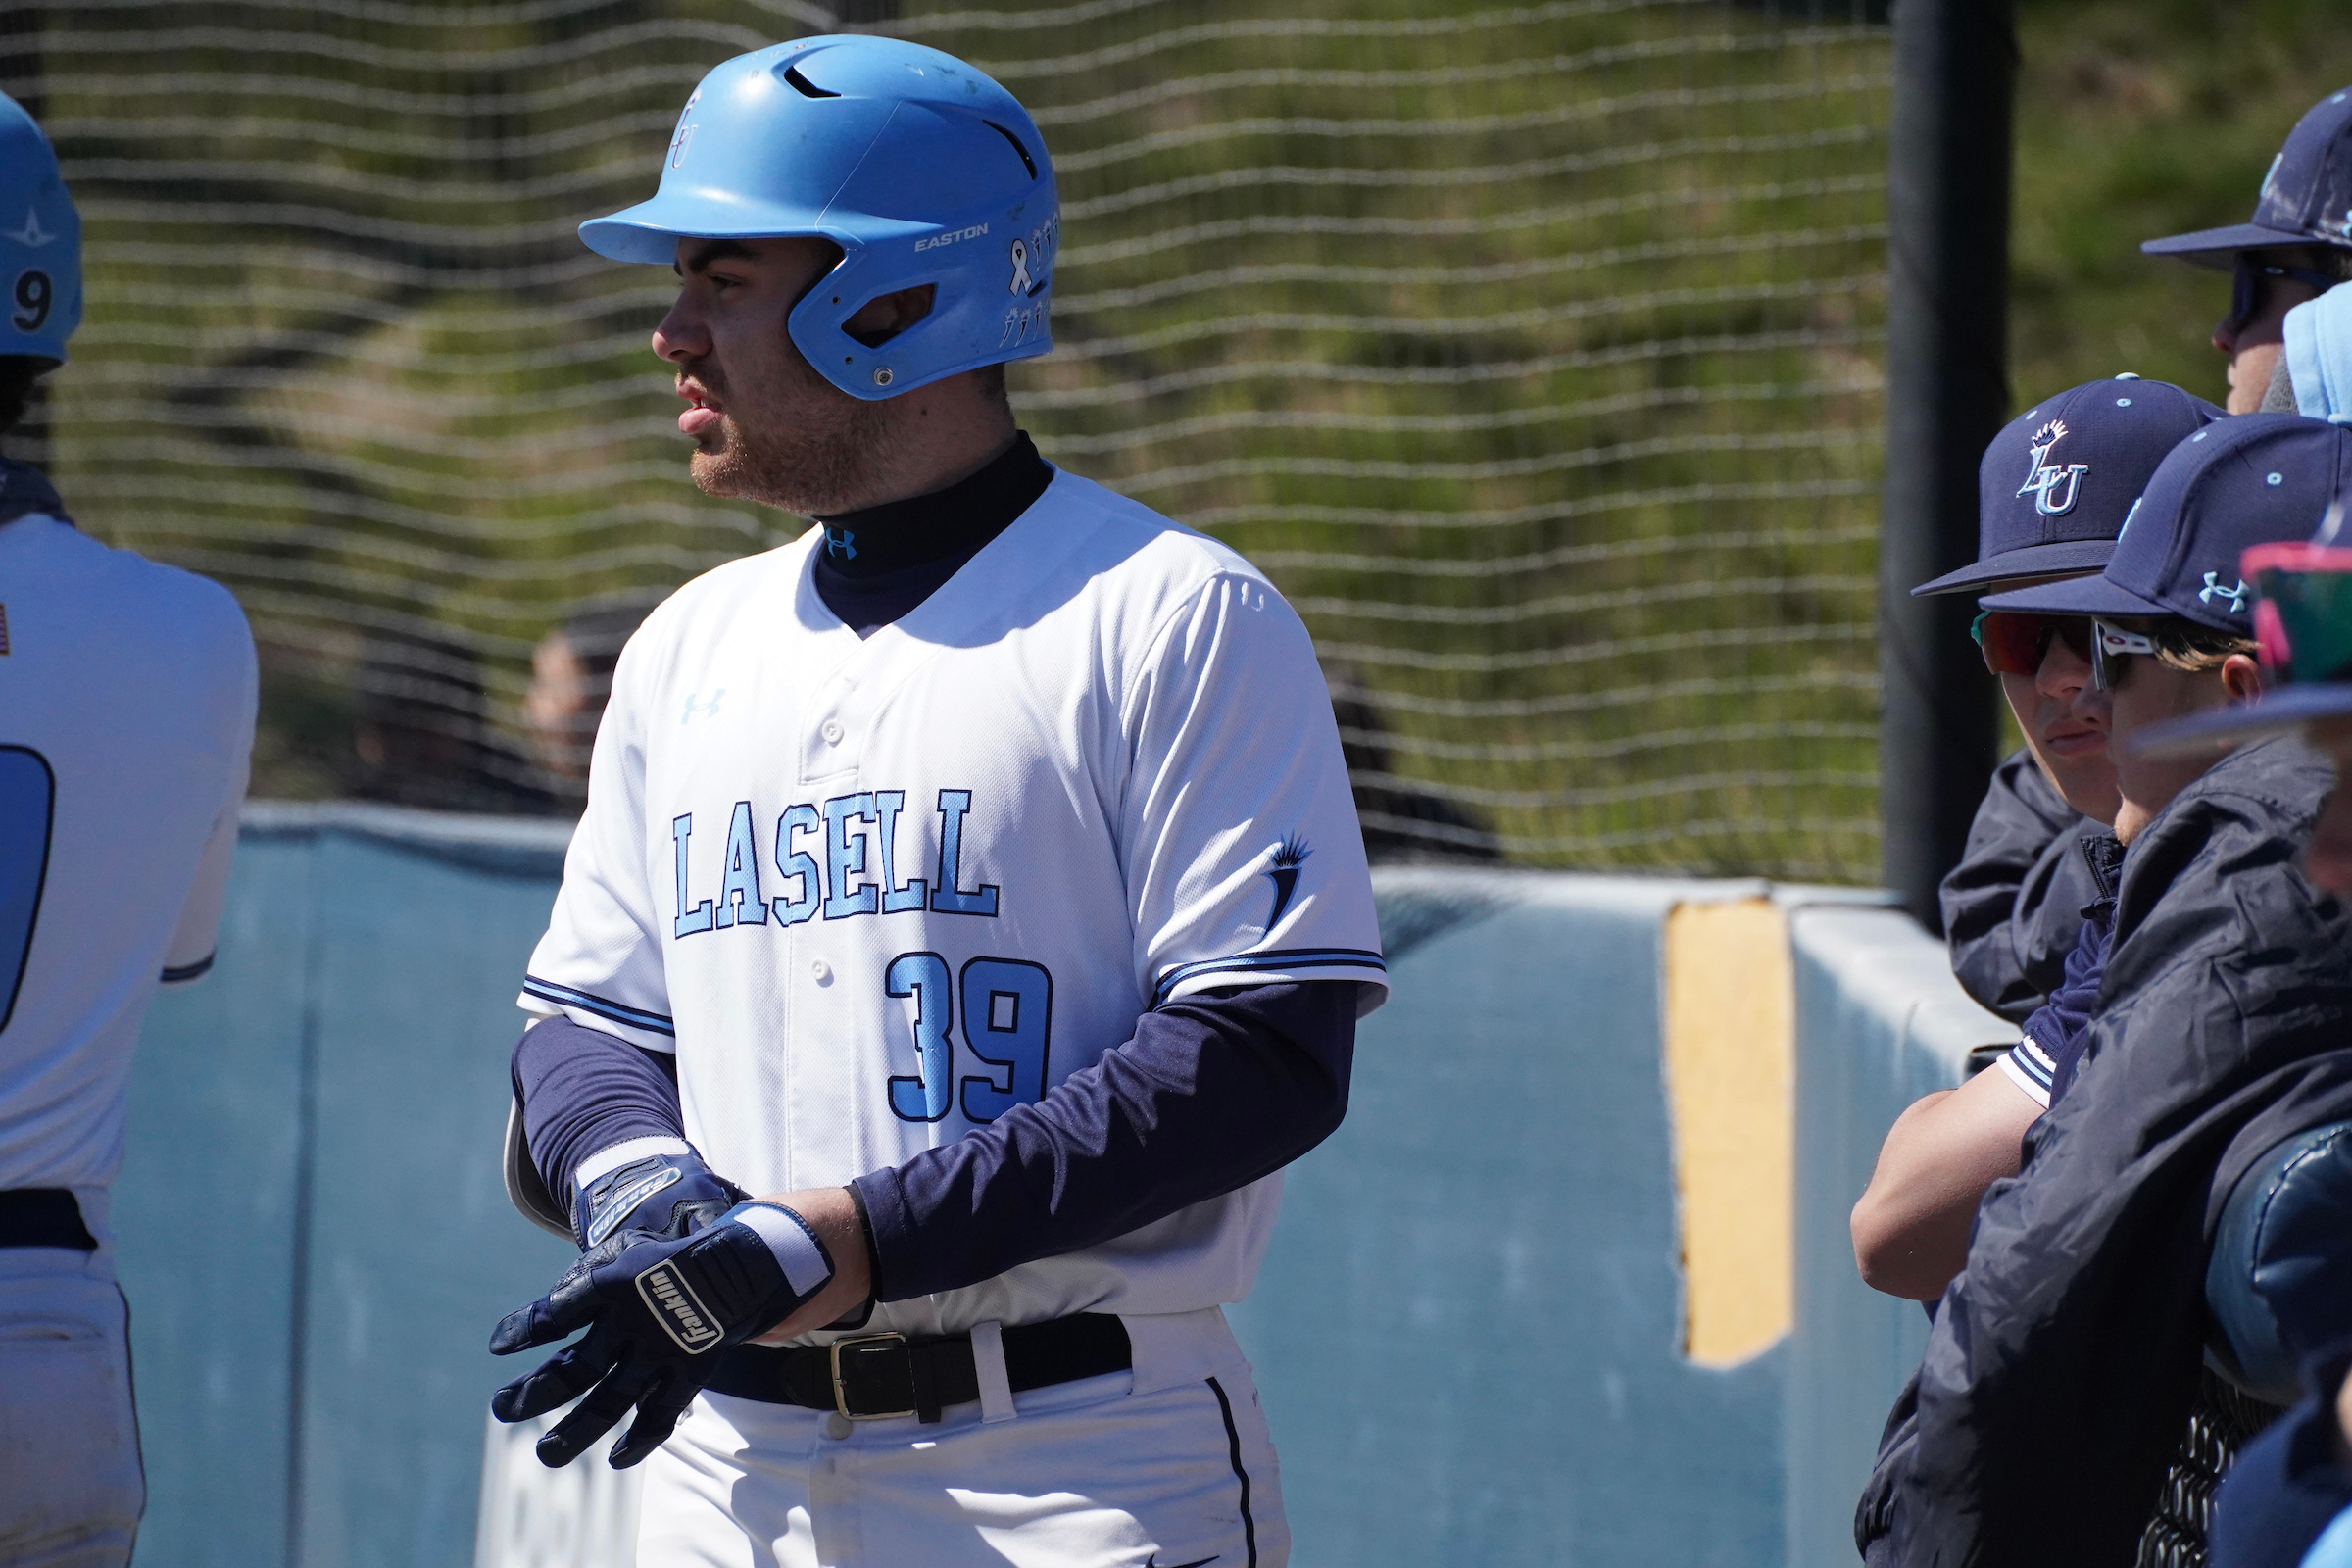 BSB: Lasers Bounce Back at Nichols